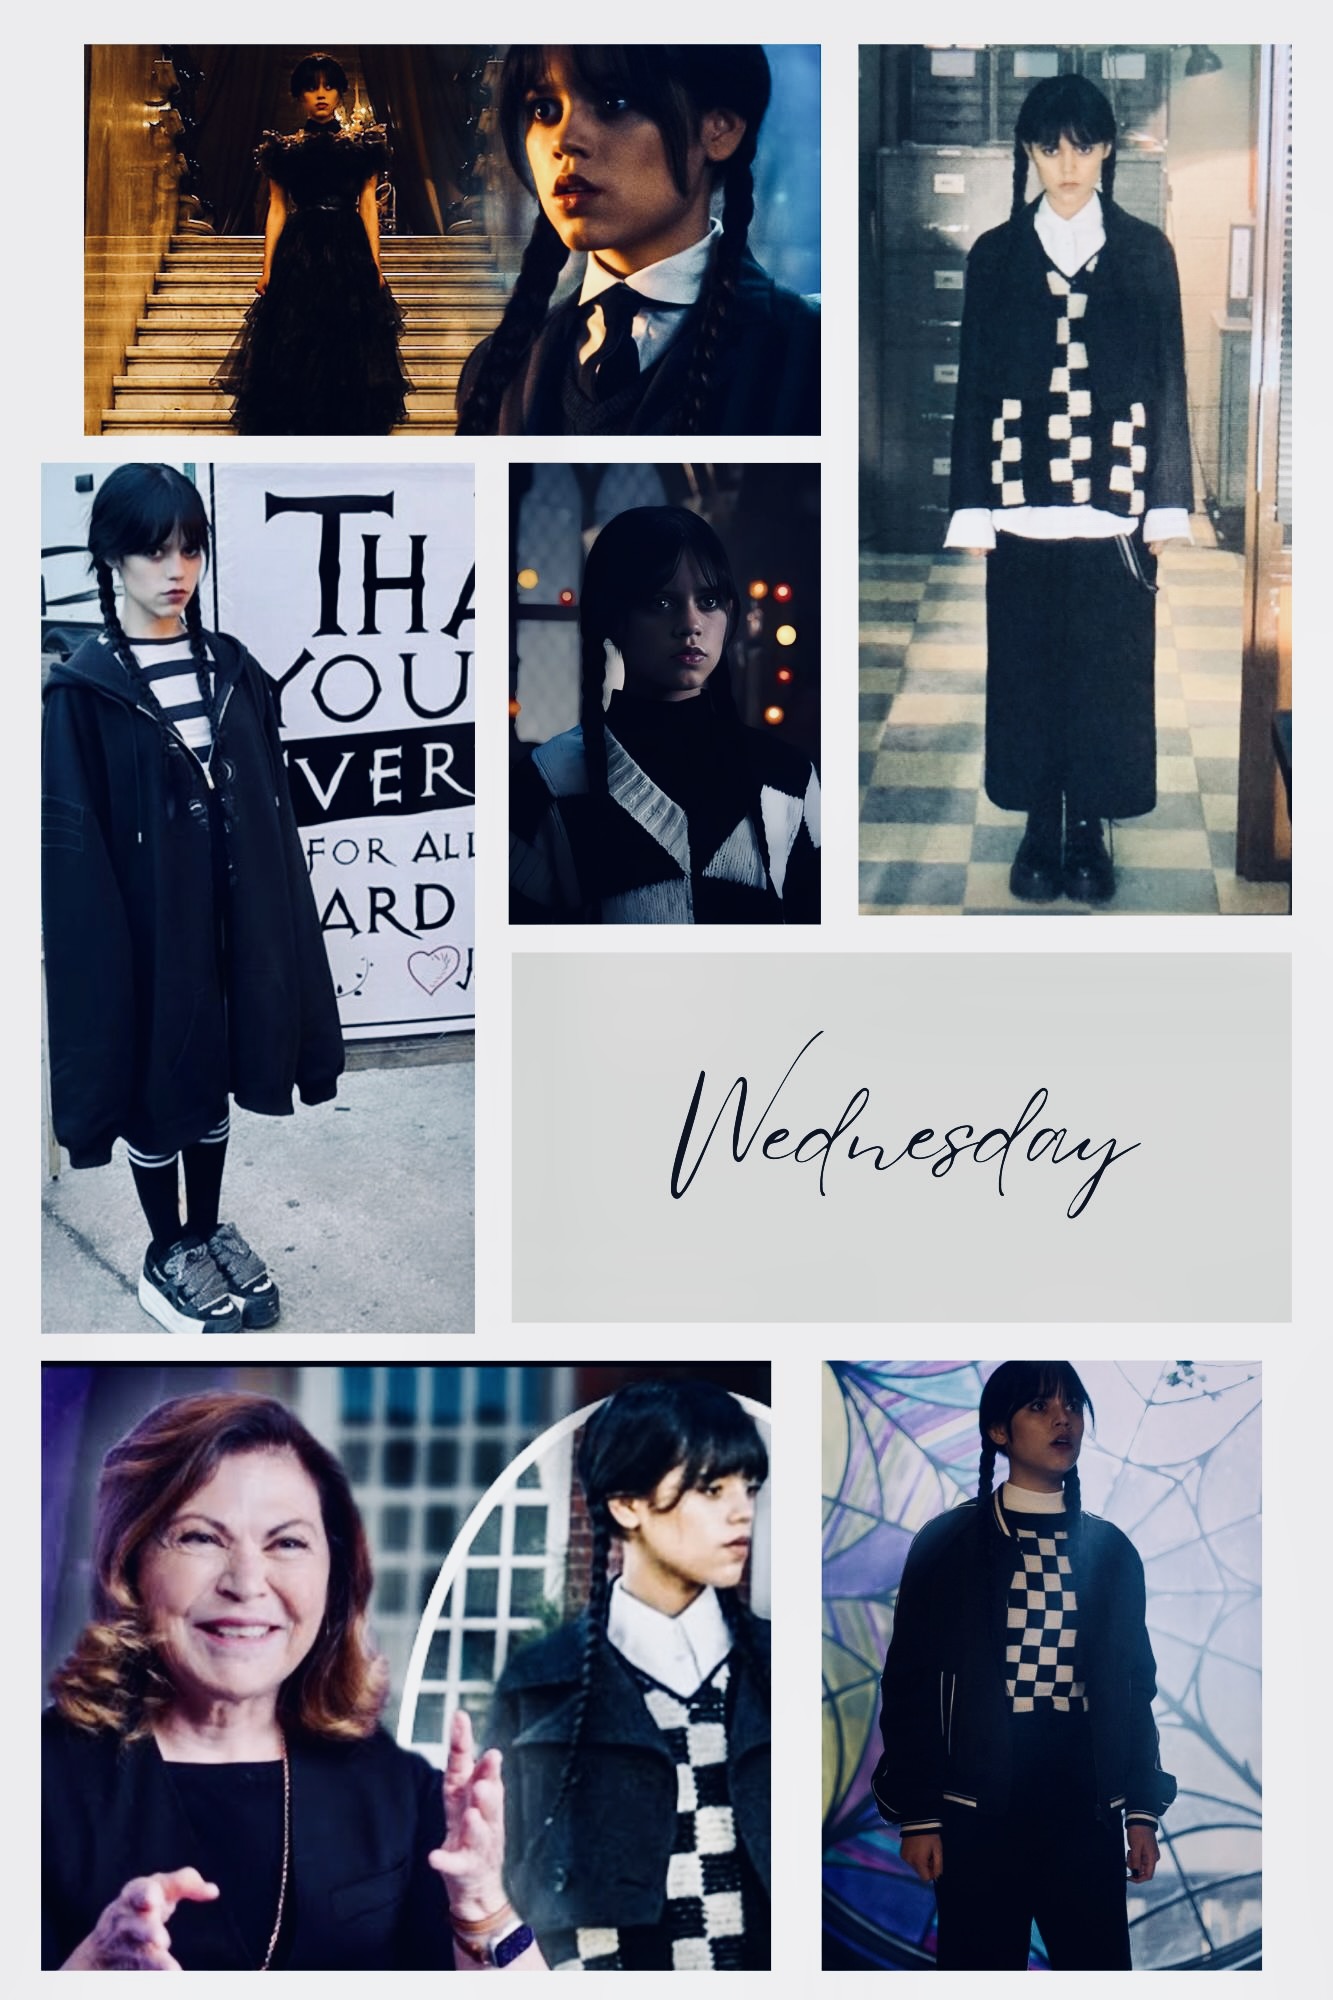 Wednesday Addams outfits costumes